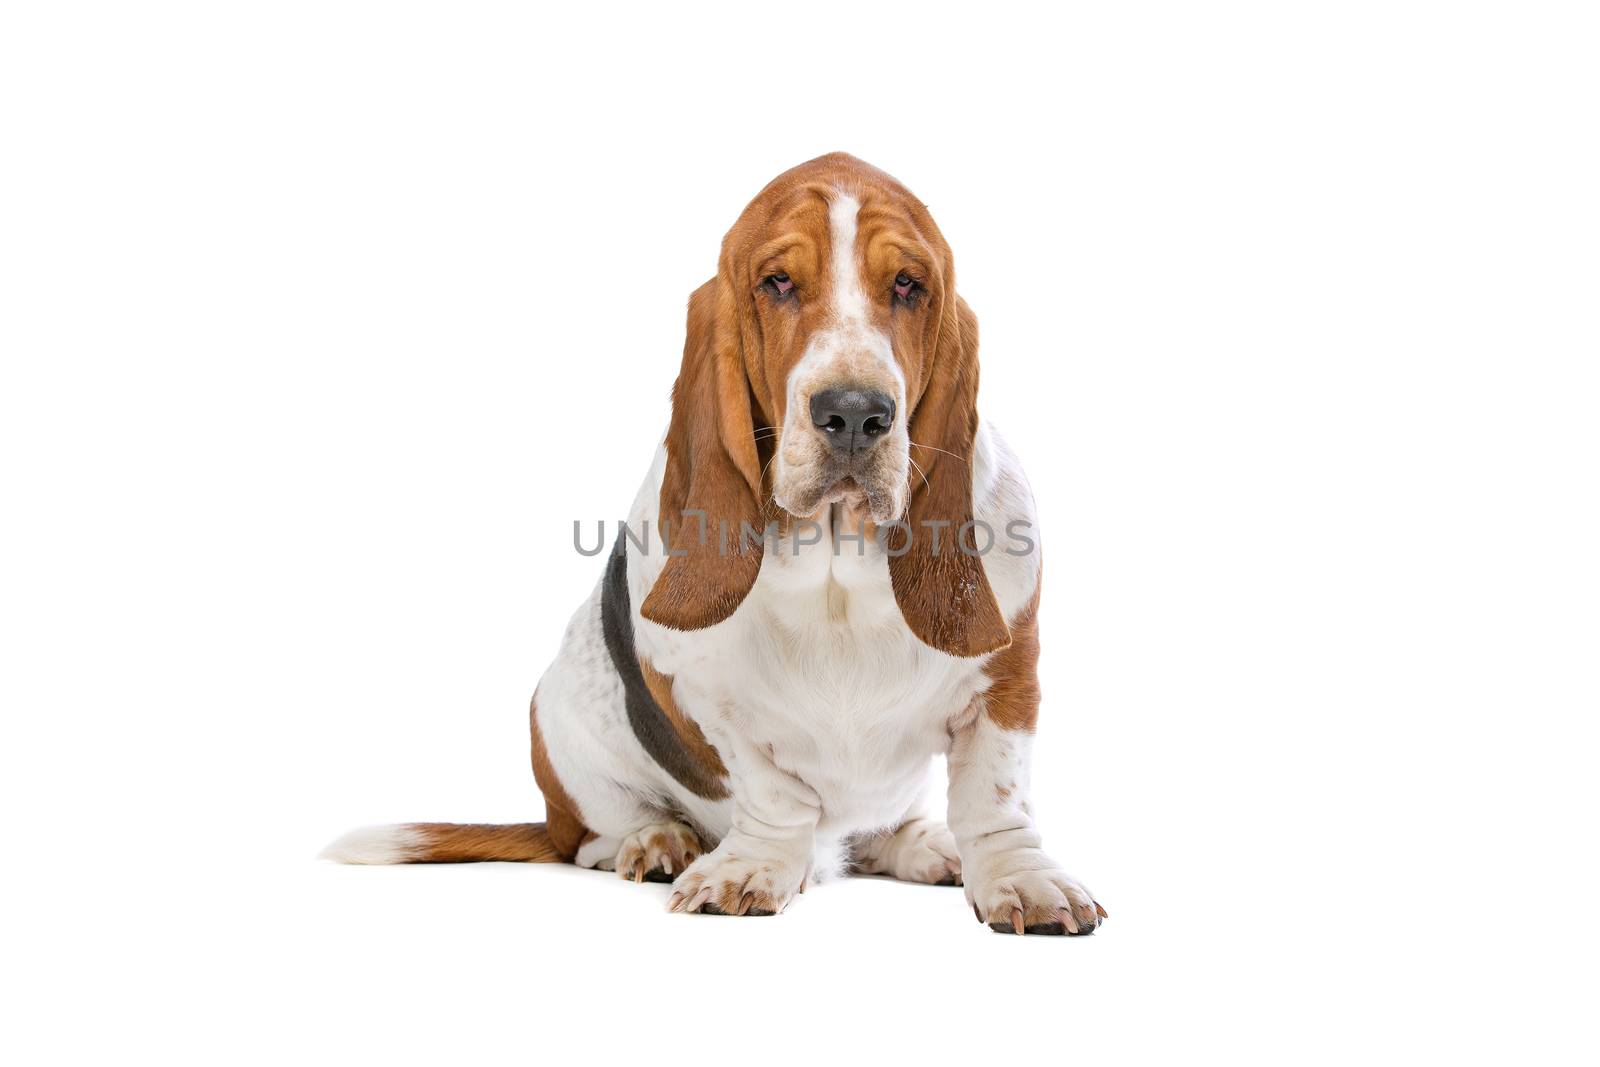 Basset hound in front of a white background